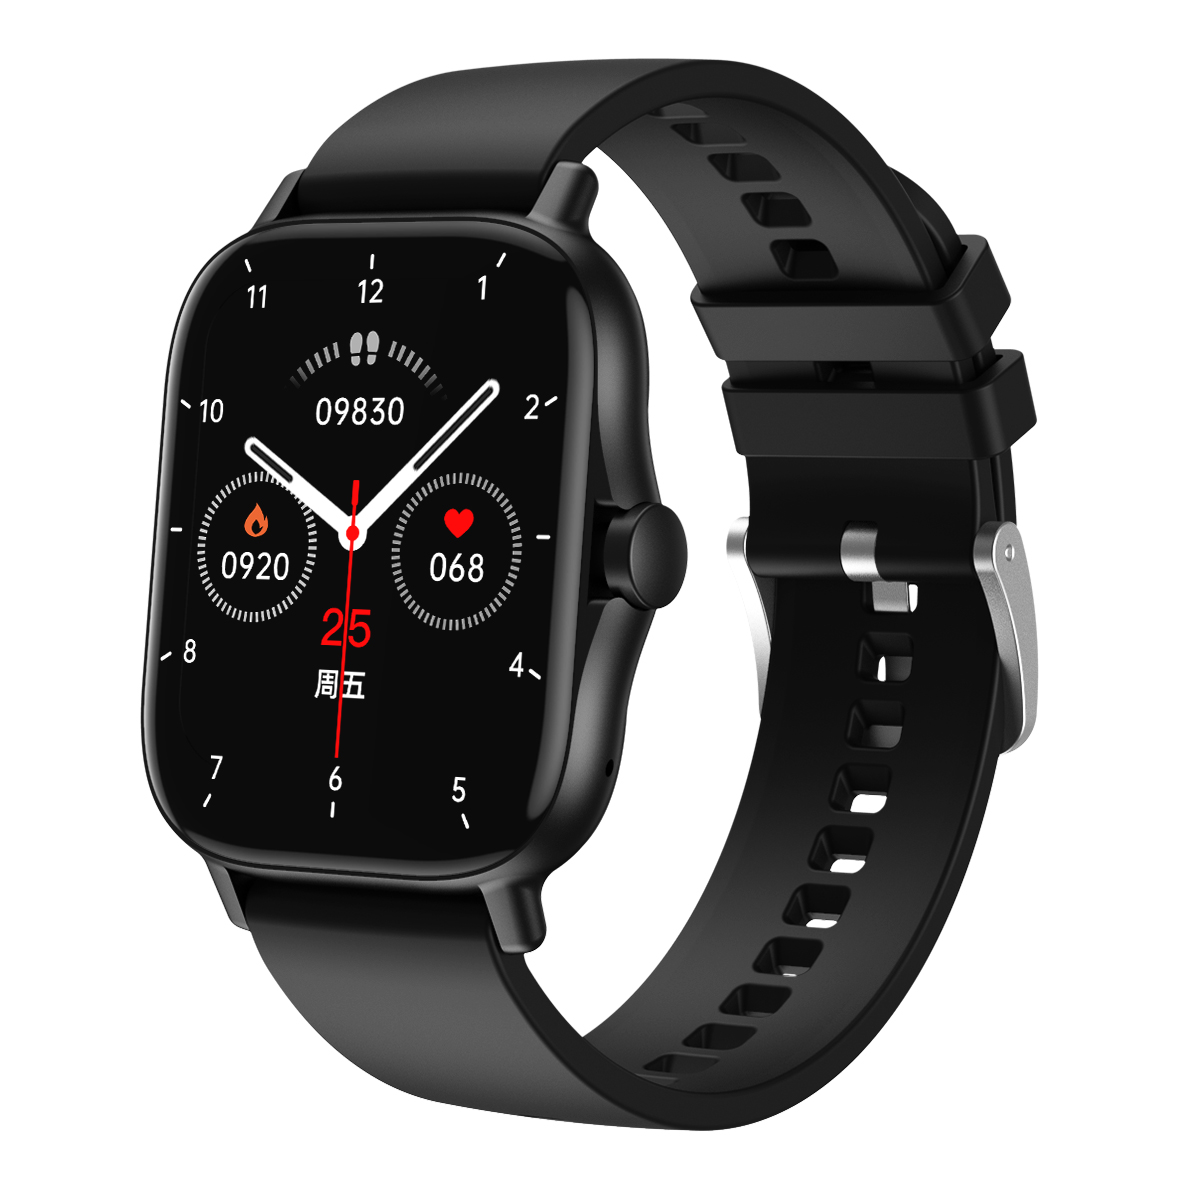 Heart Rate Monitoring Smart Watch Phone with Voice Call DW11